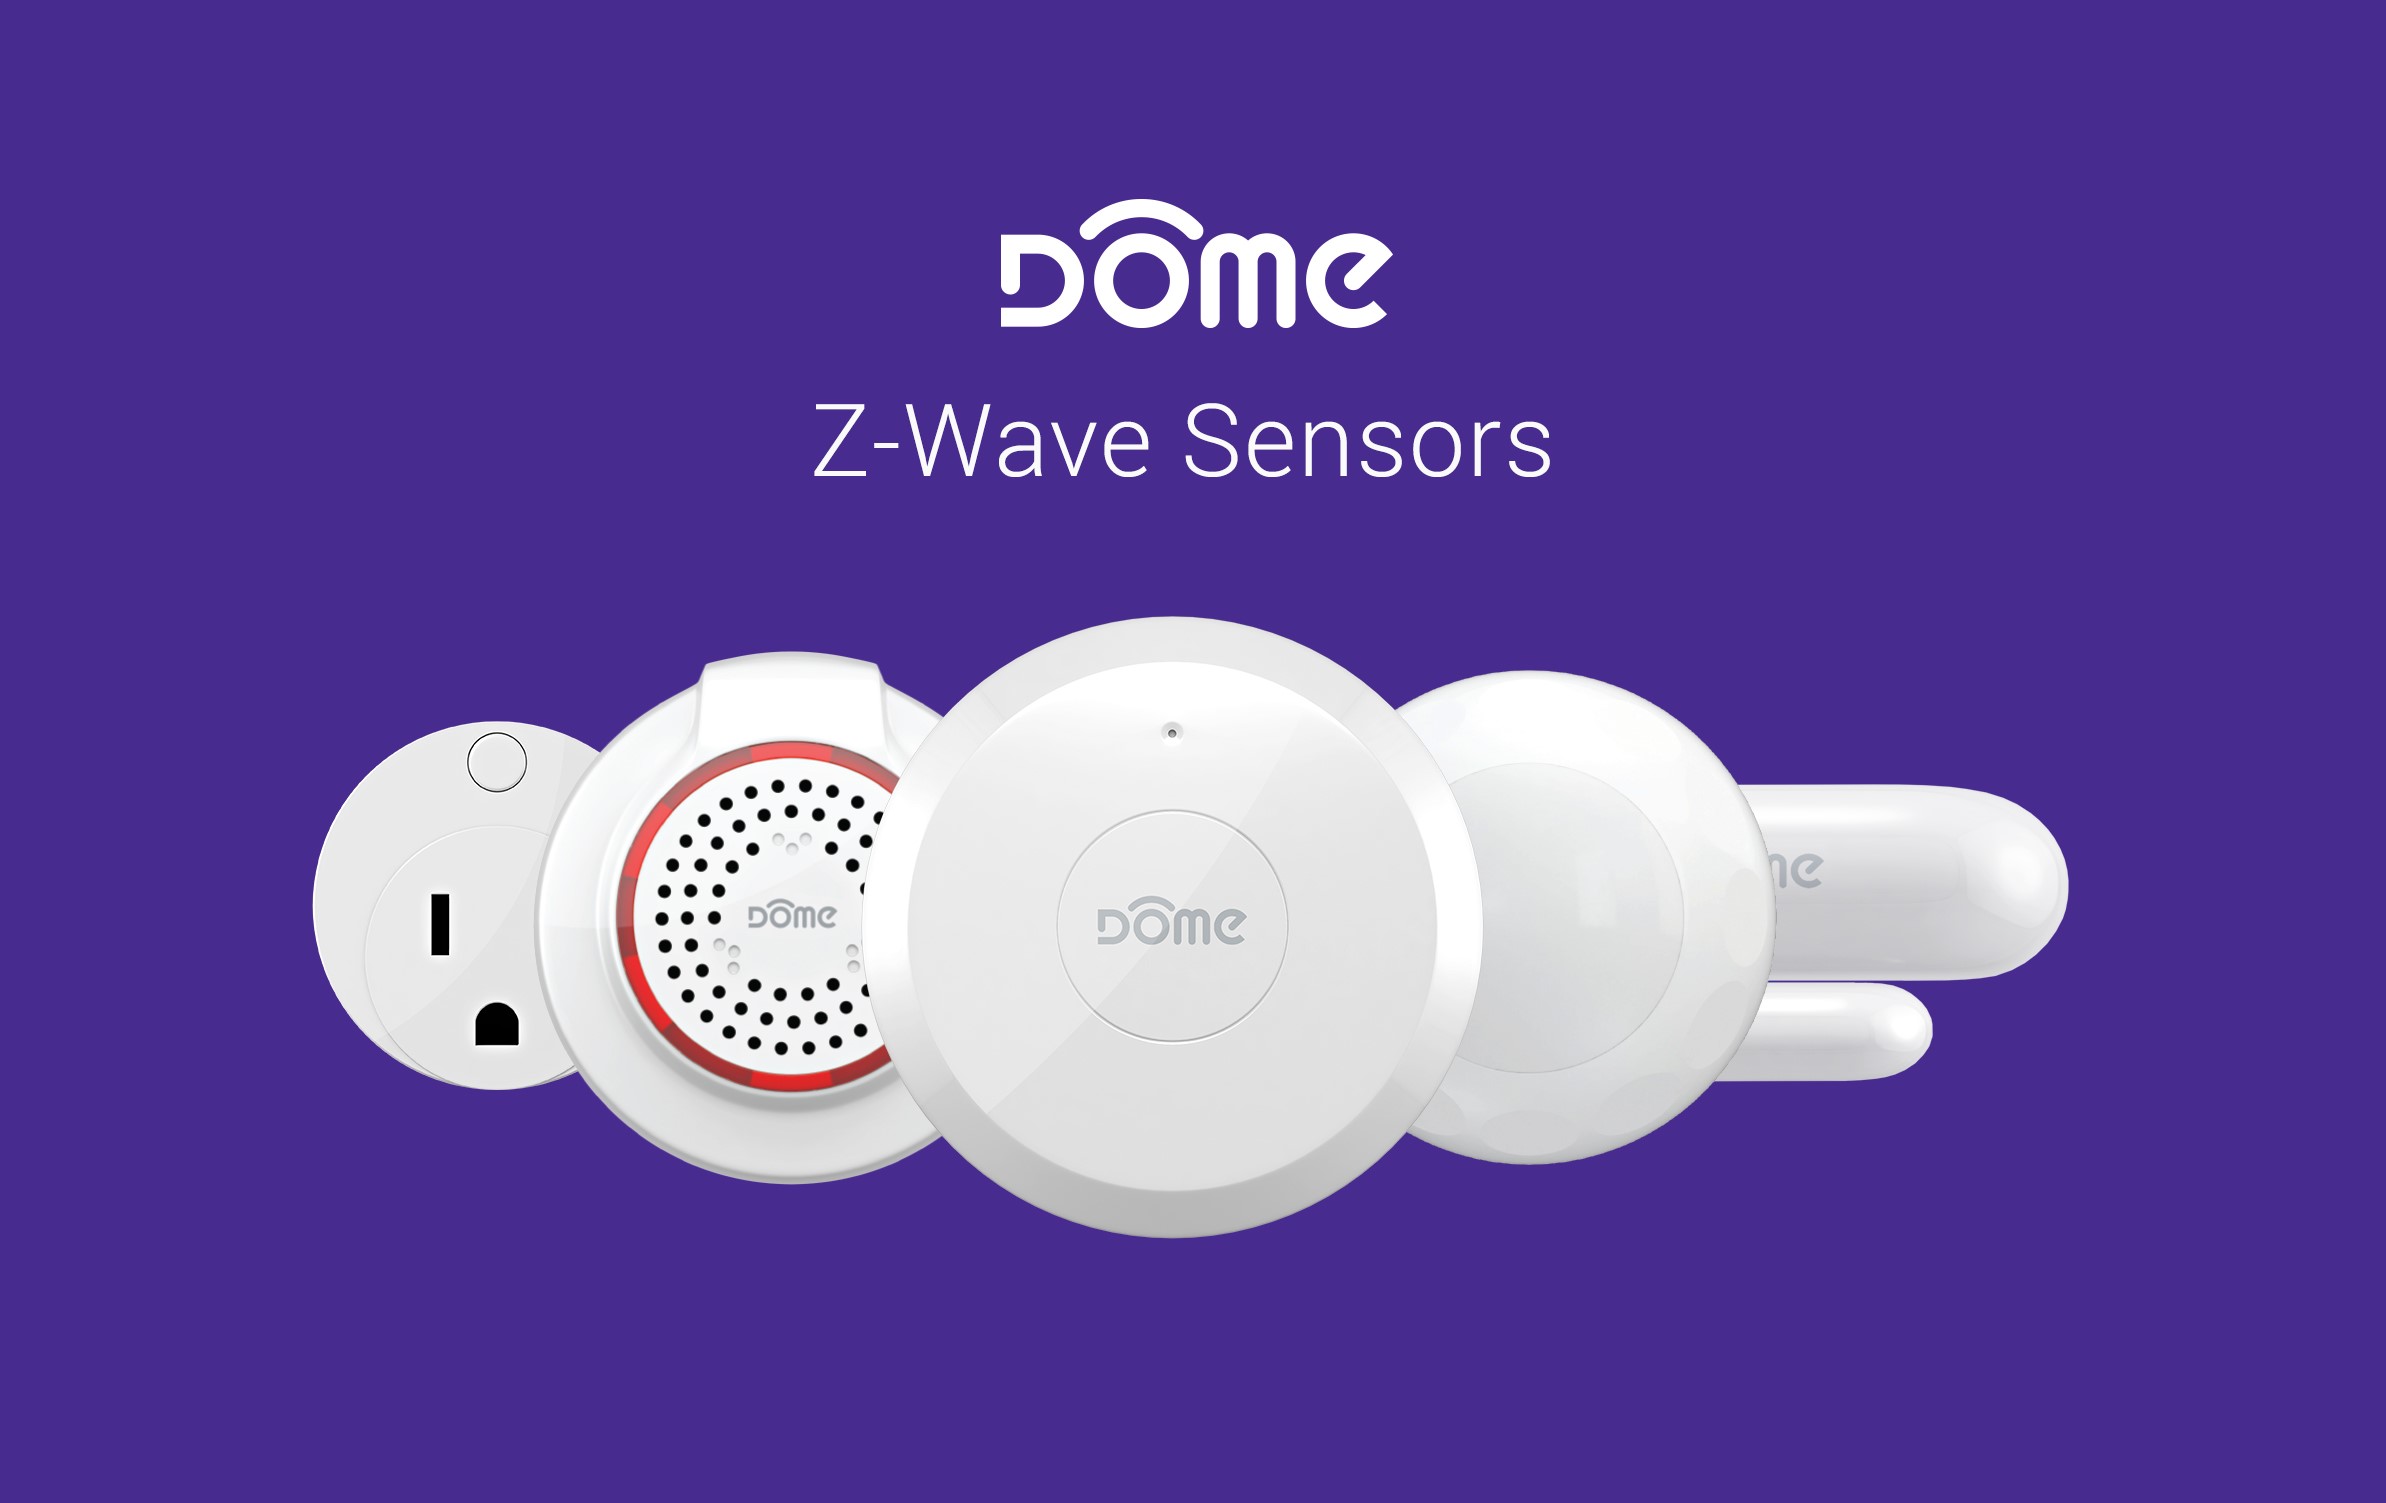 Set of Dome Home Automation Z-Wave Devices